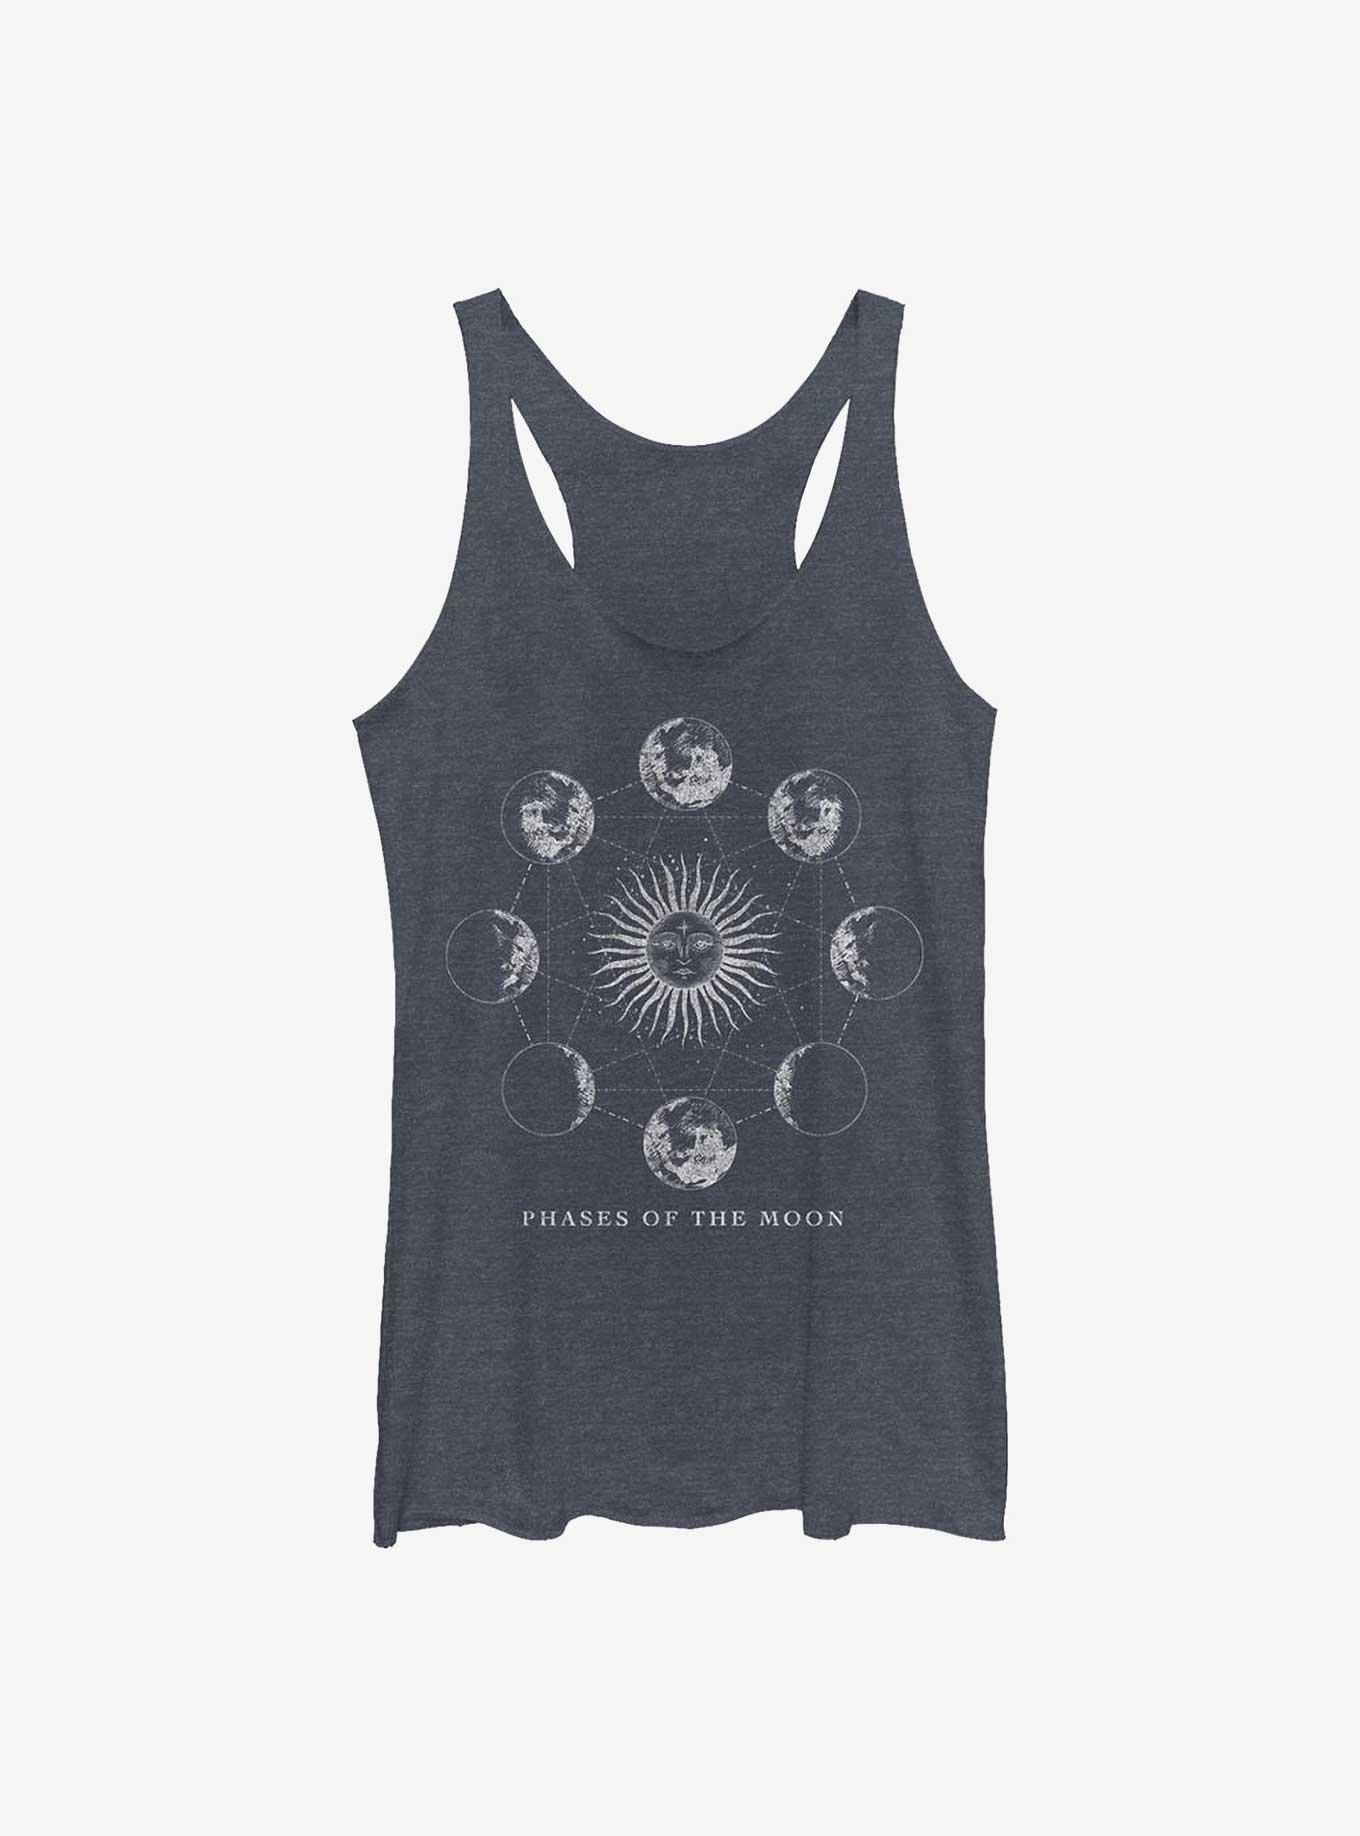 Phases Of The Moon Girls Tank - BLUE | Hot Topic